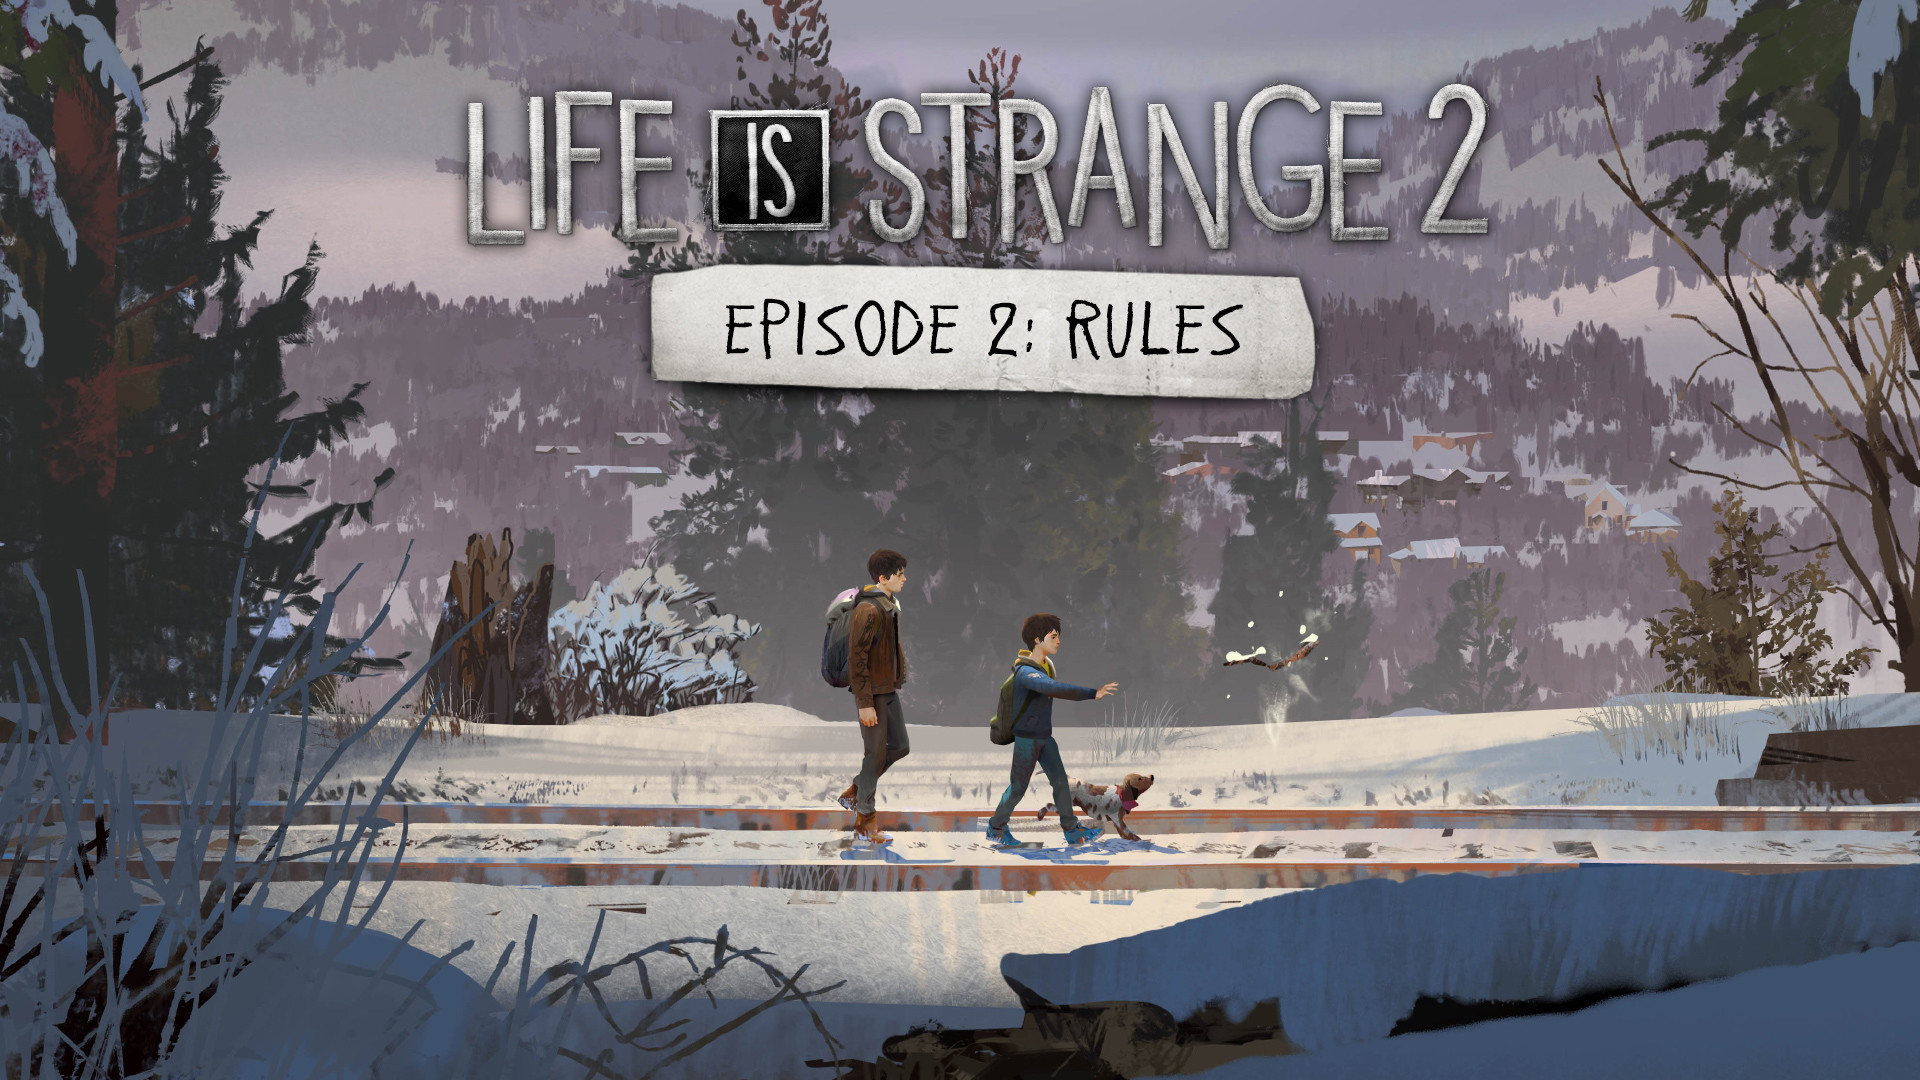 Wallpaper From Life Is Strange 2 1920x1080